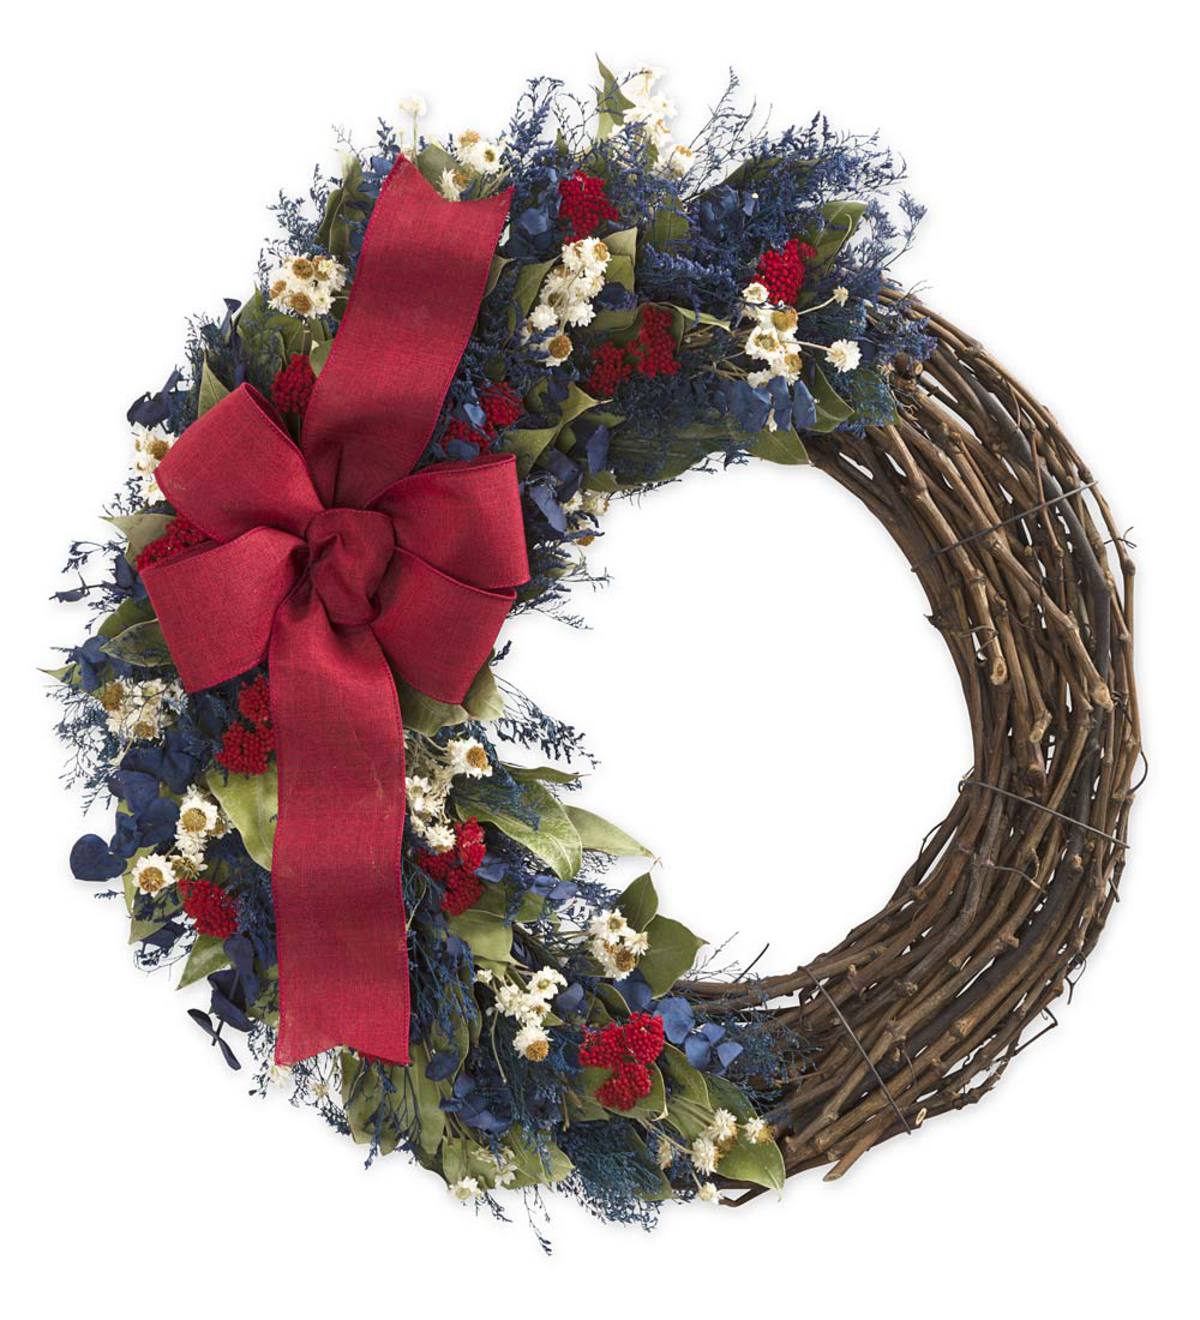 Americana Wreath with Red Ribbon, 18"dia.